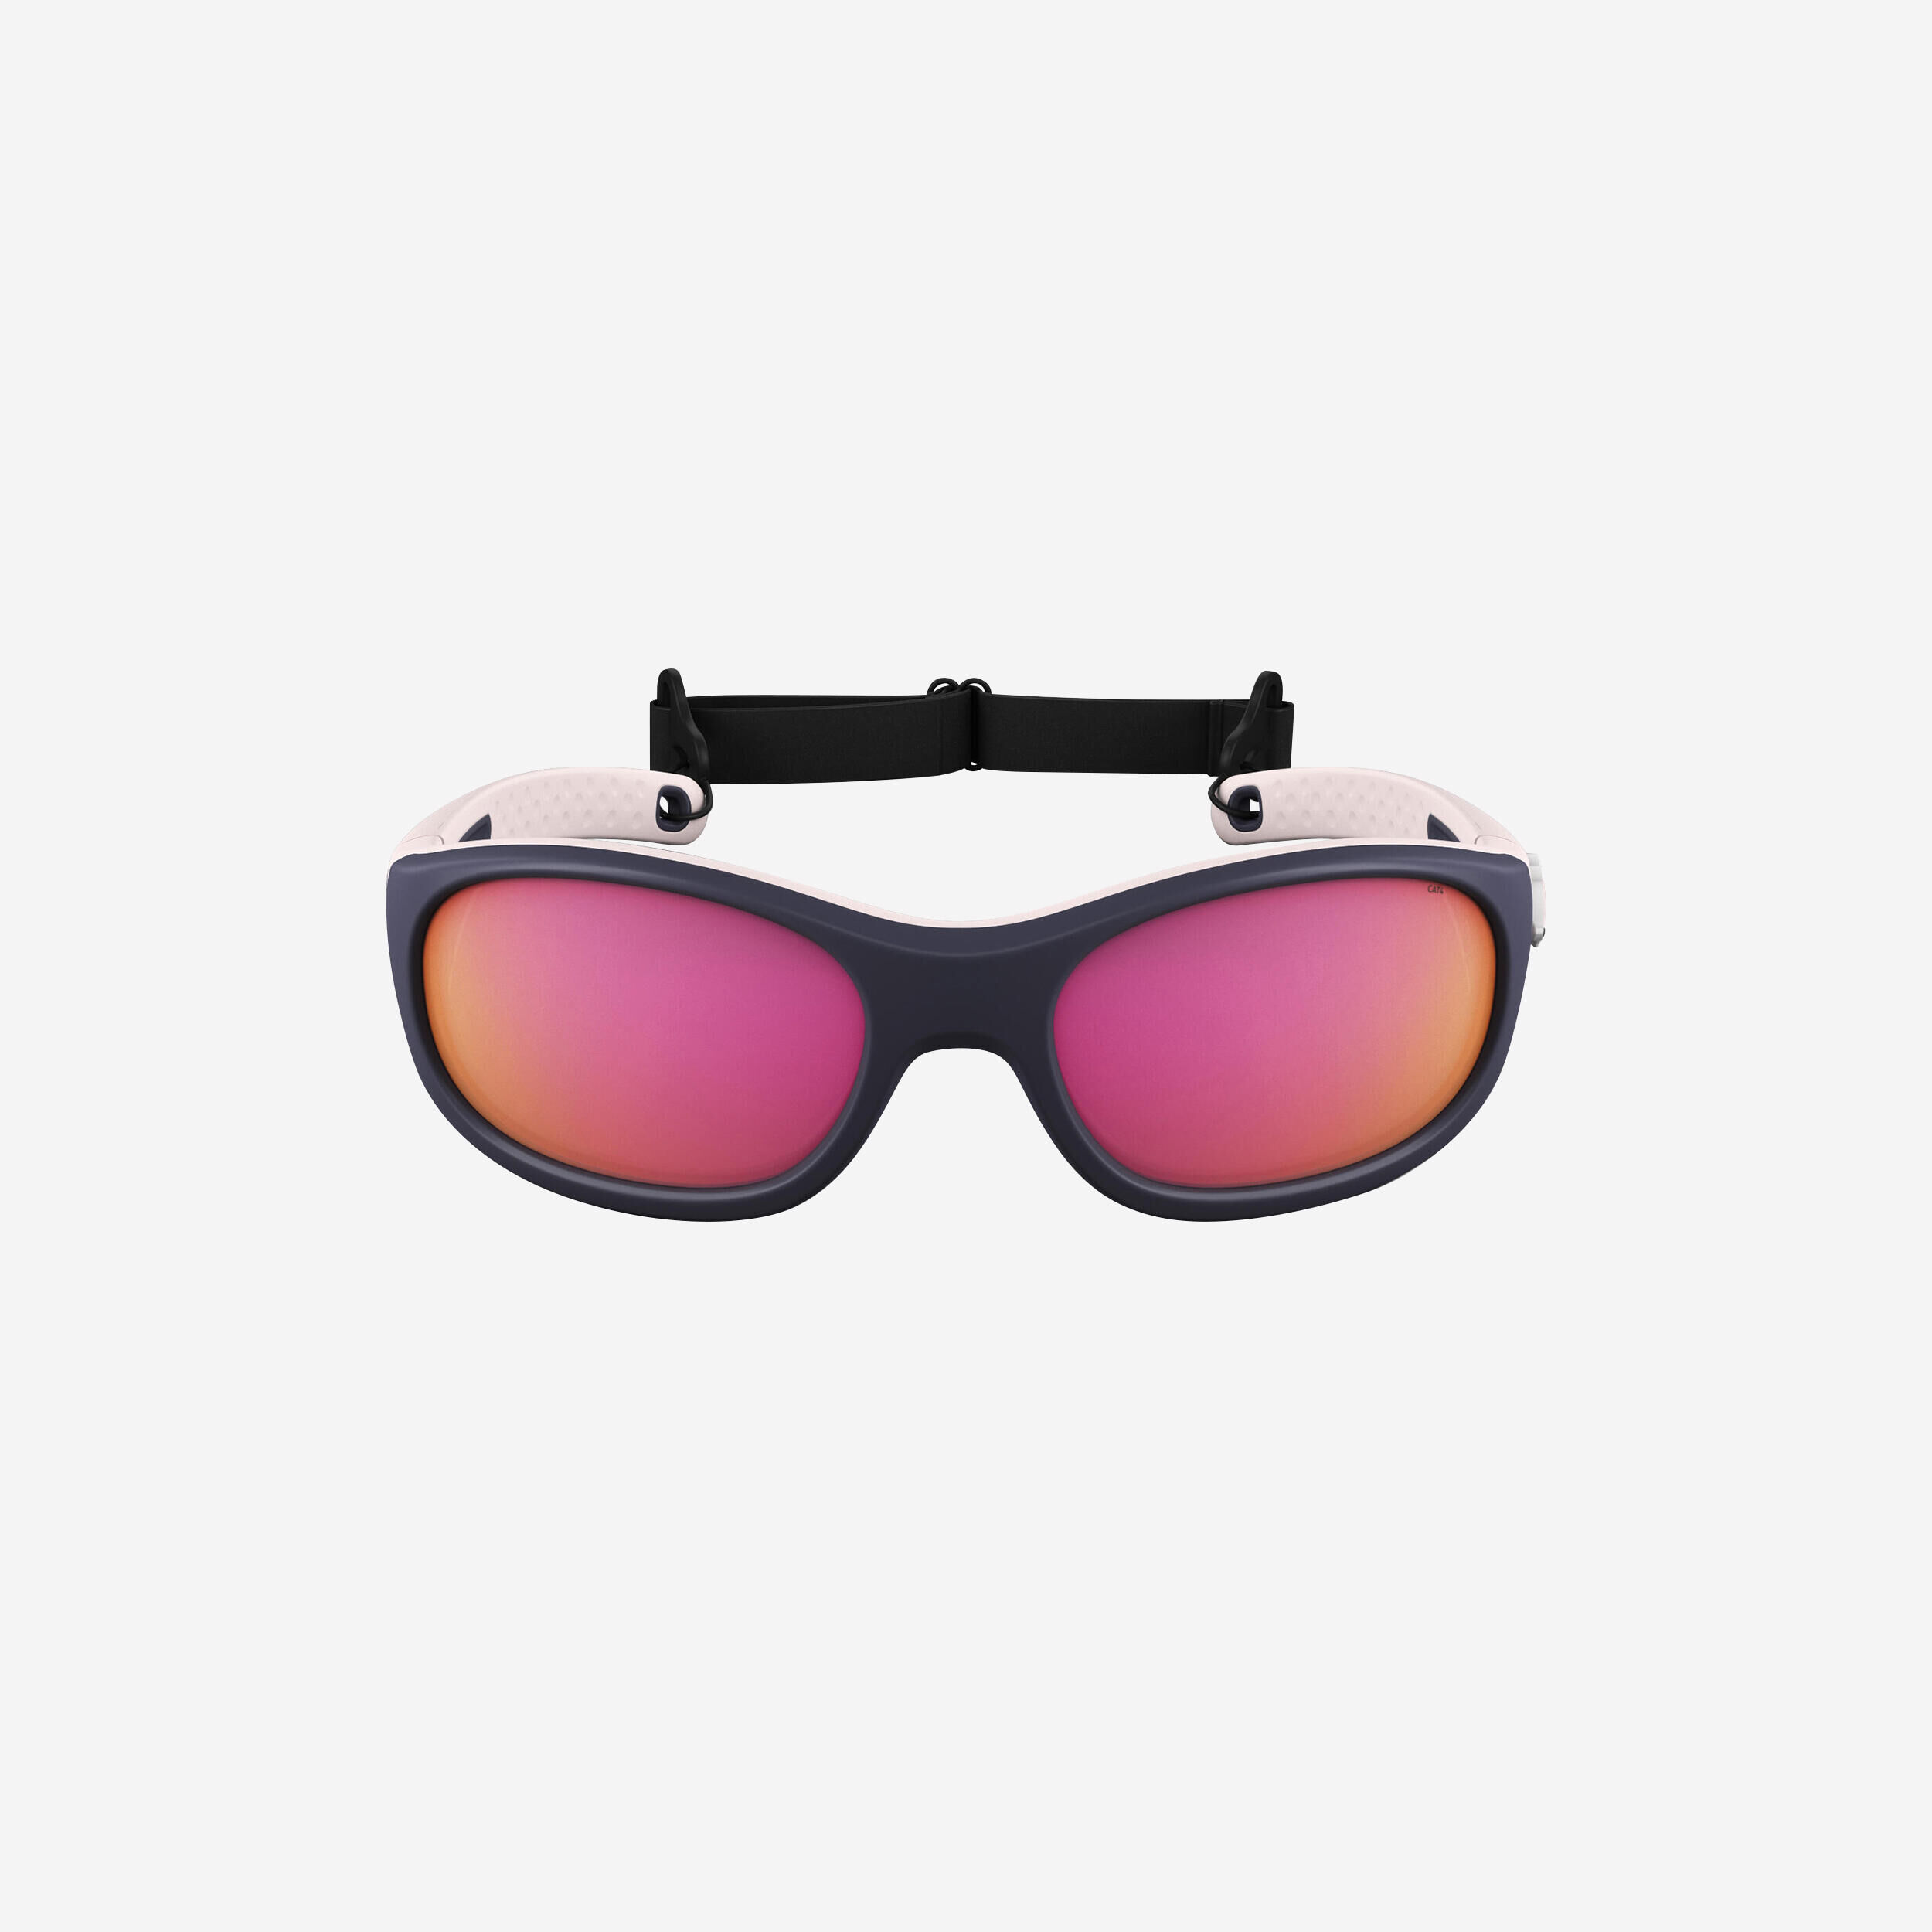 QUECHUA Hiking sunglasses - MH K500 - Children’s age 4-6 - category 4 pink blue